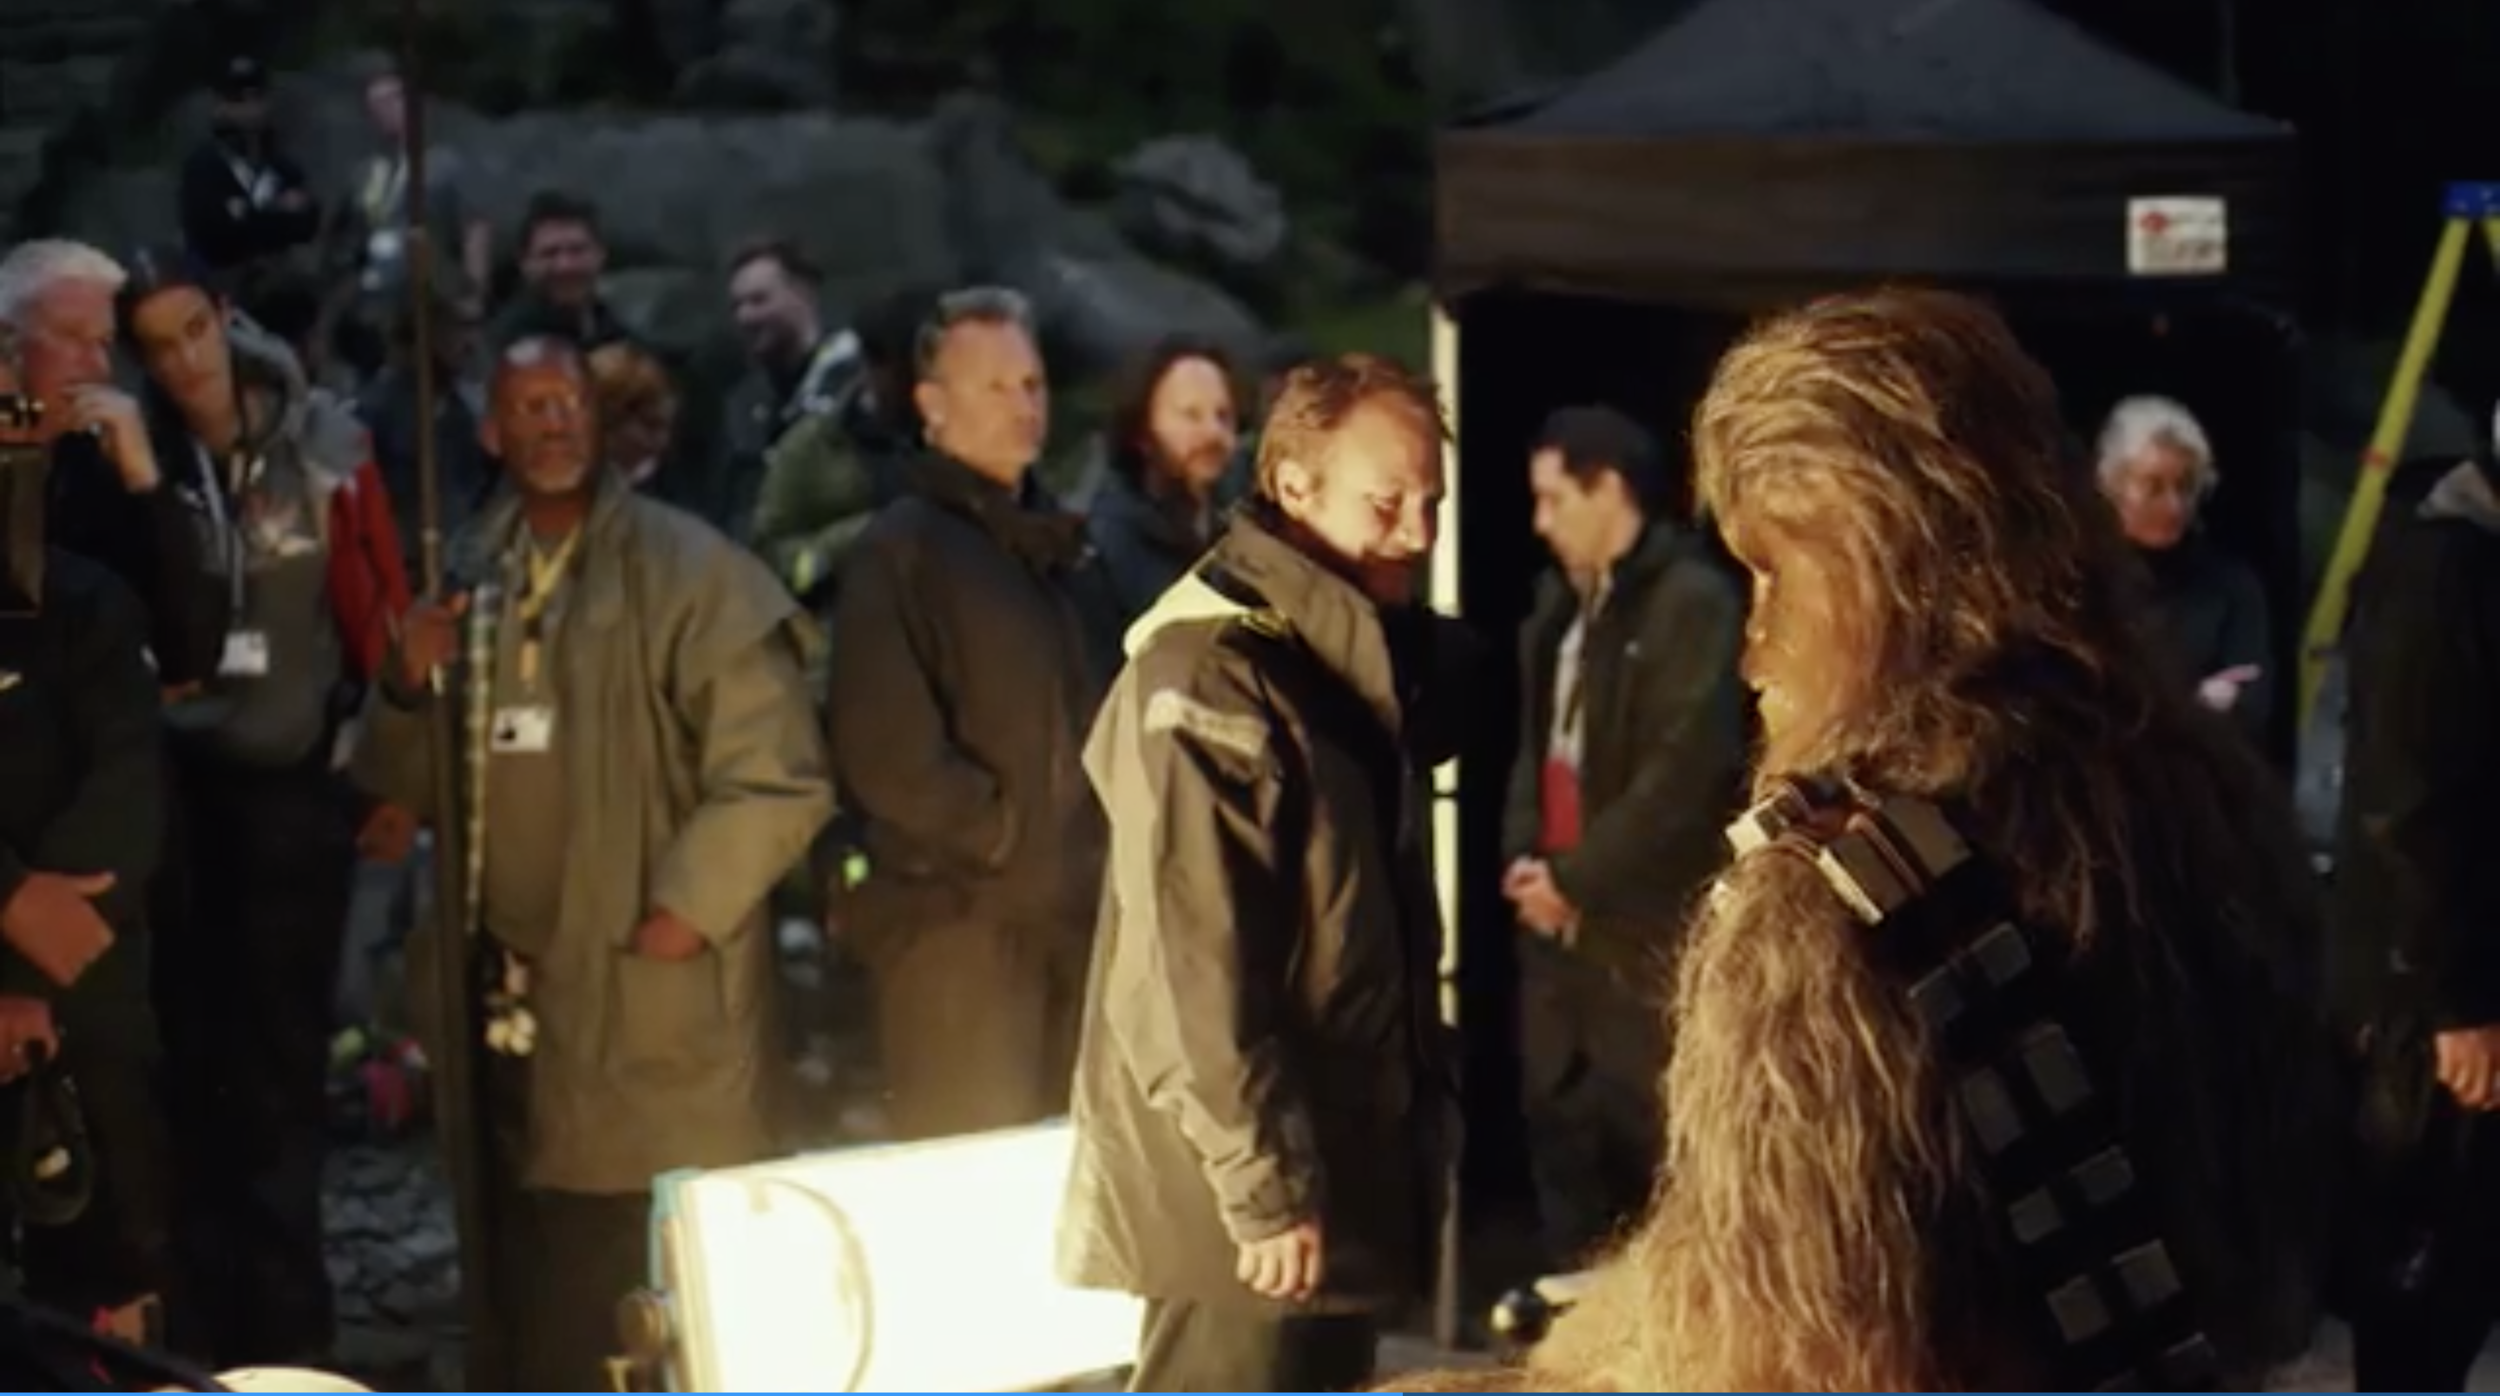 Watch: Thrilling New Behind-the-Scenes Footage of Star Wars: The Last Jedi!  - Parade